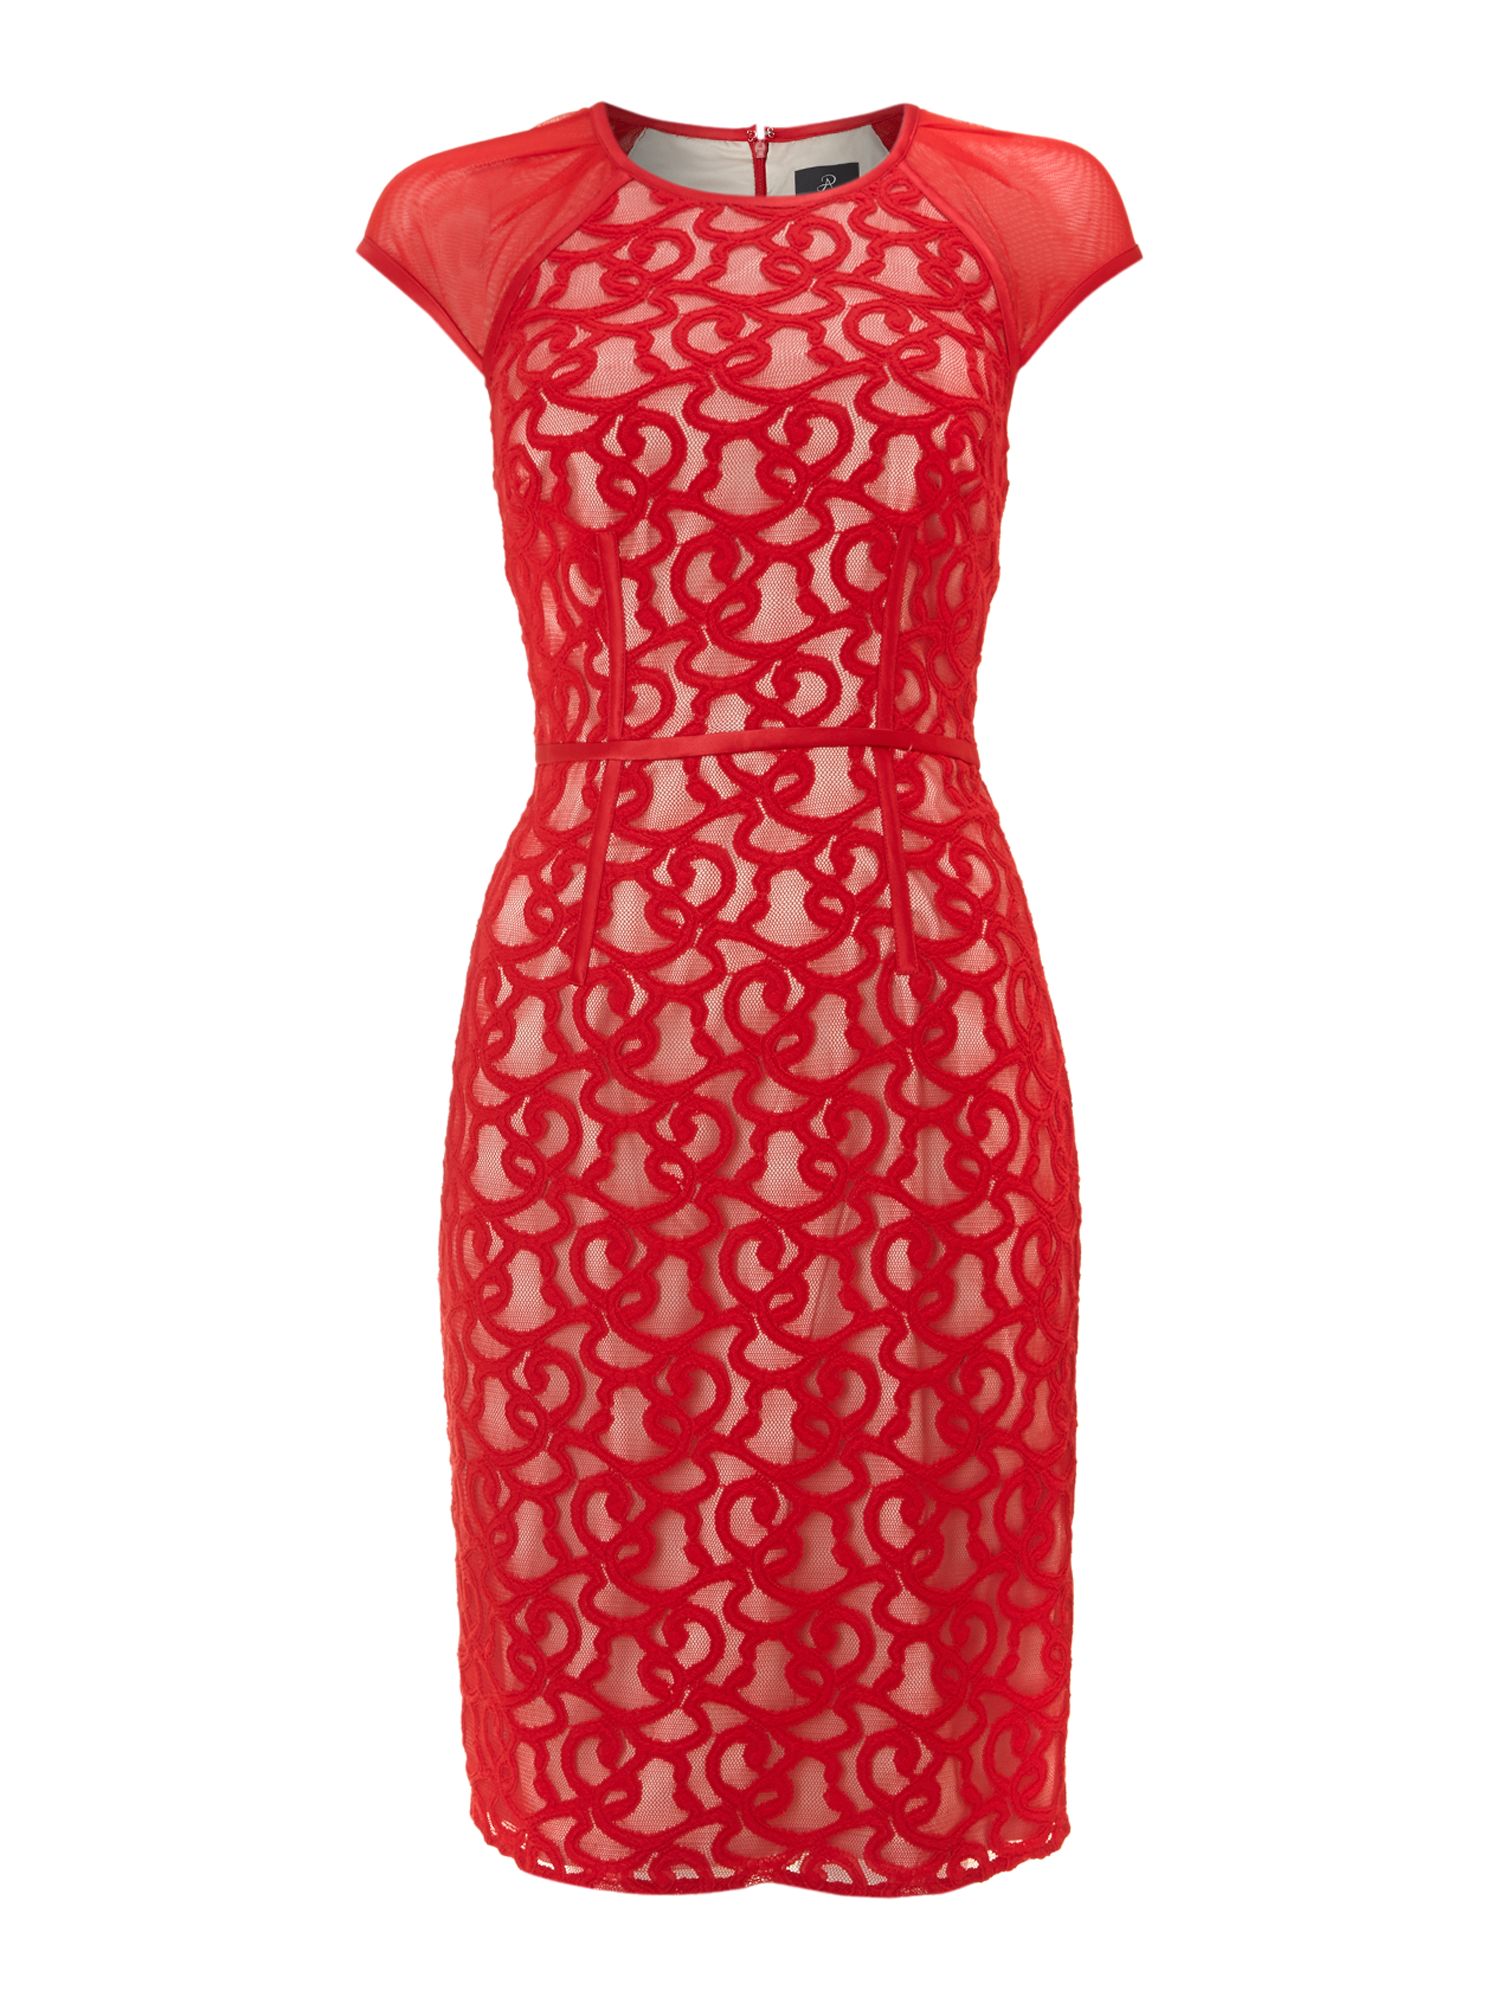 Adrianna Papell Tonal Piped Lace Dress in Red | Lyst